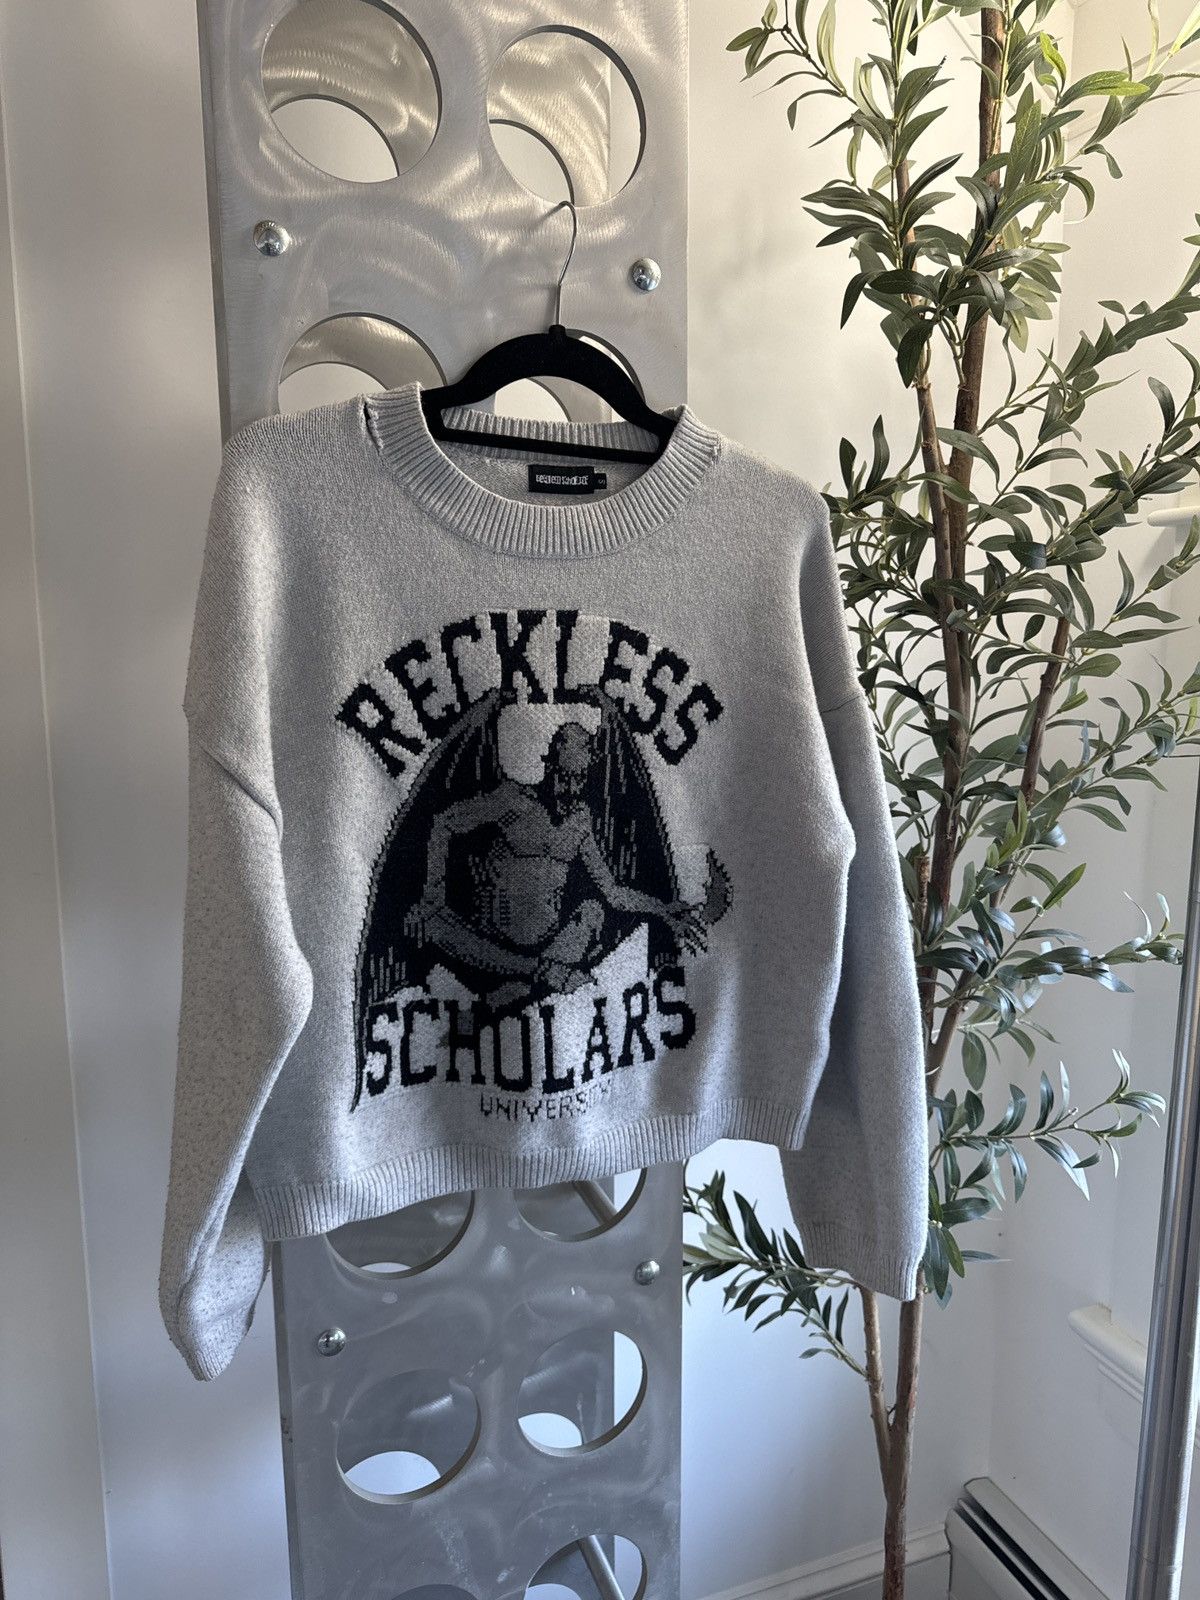 Reckless Scholars Sweater | Grailed